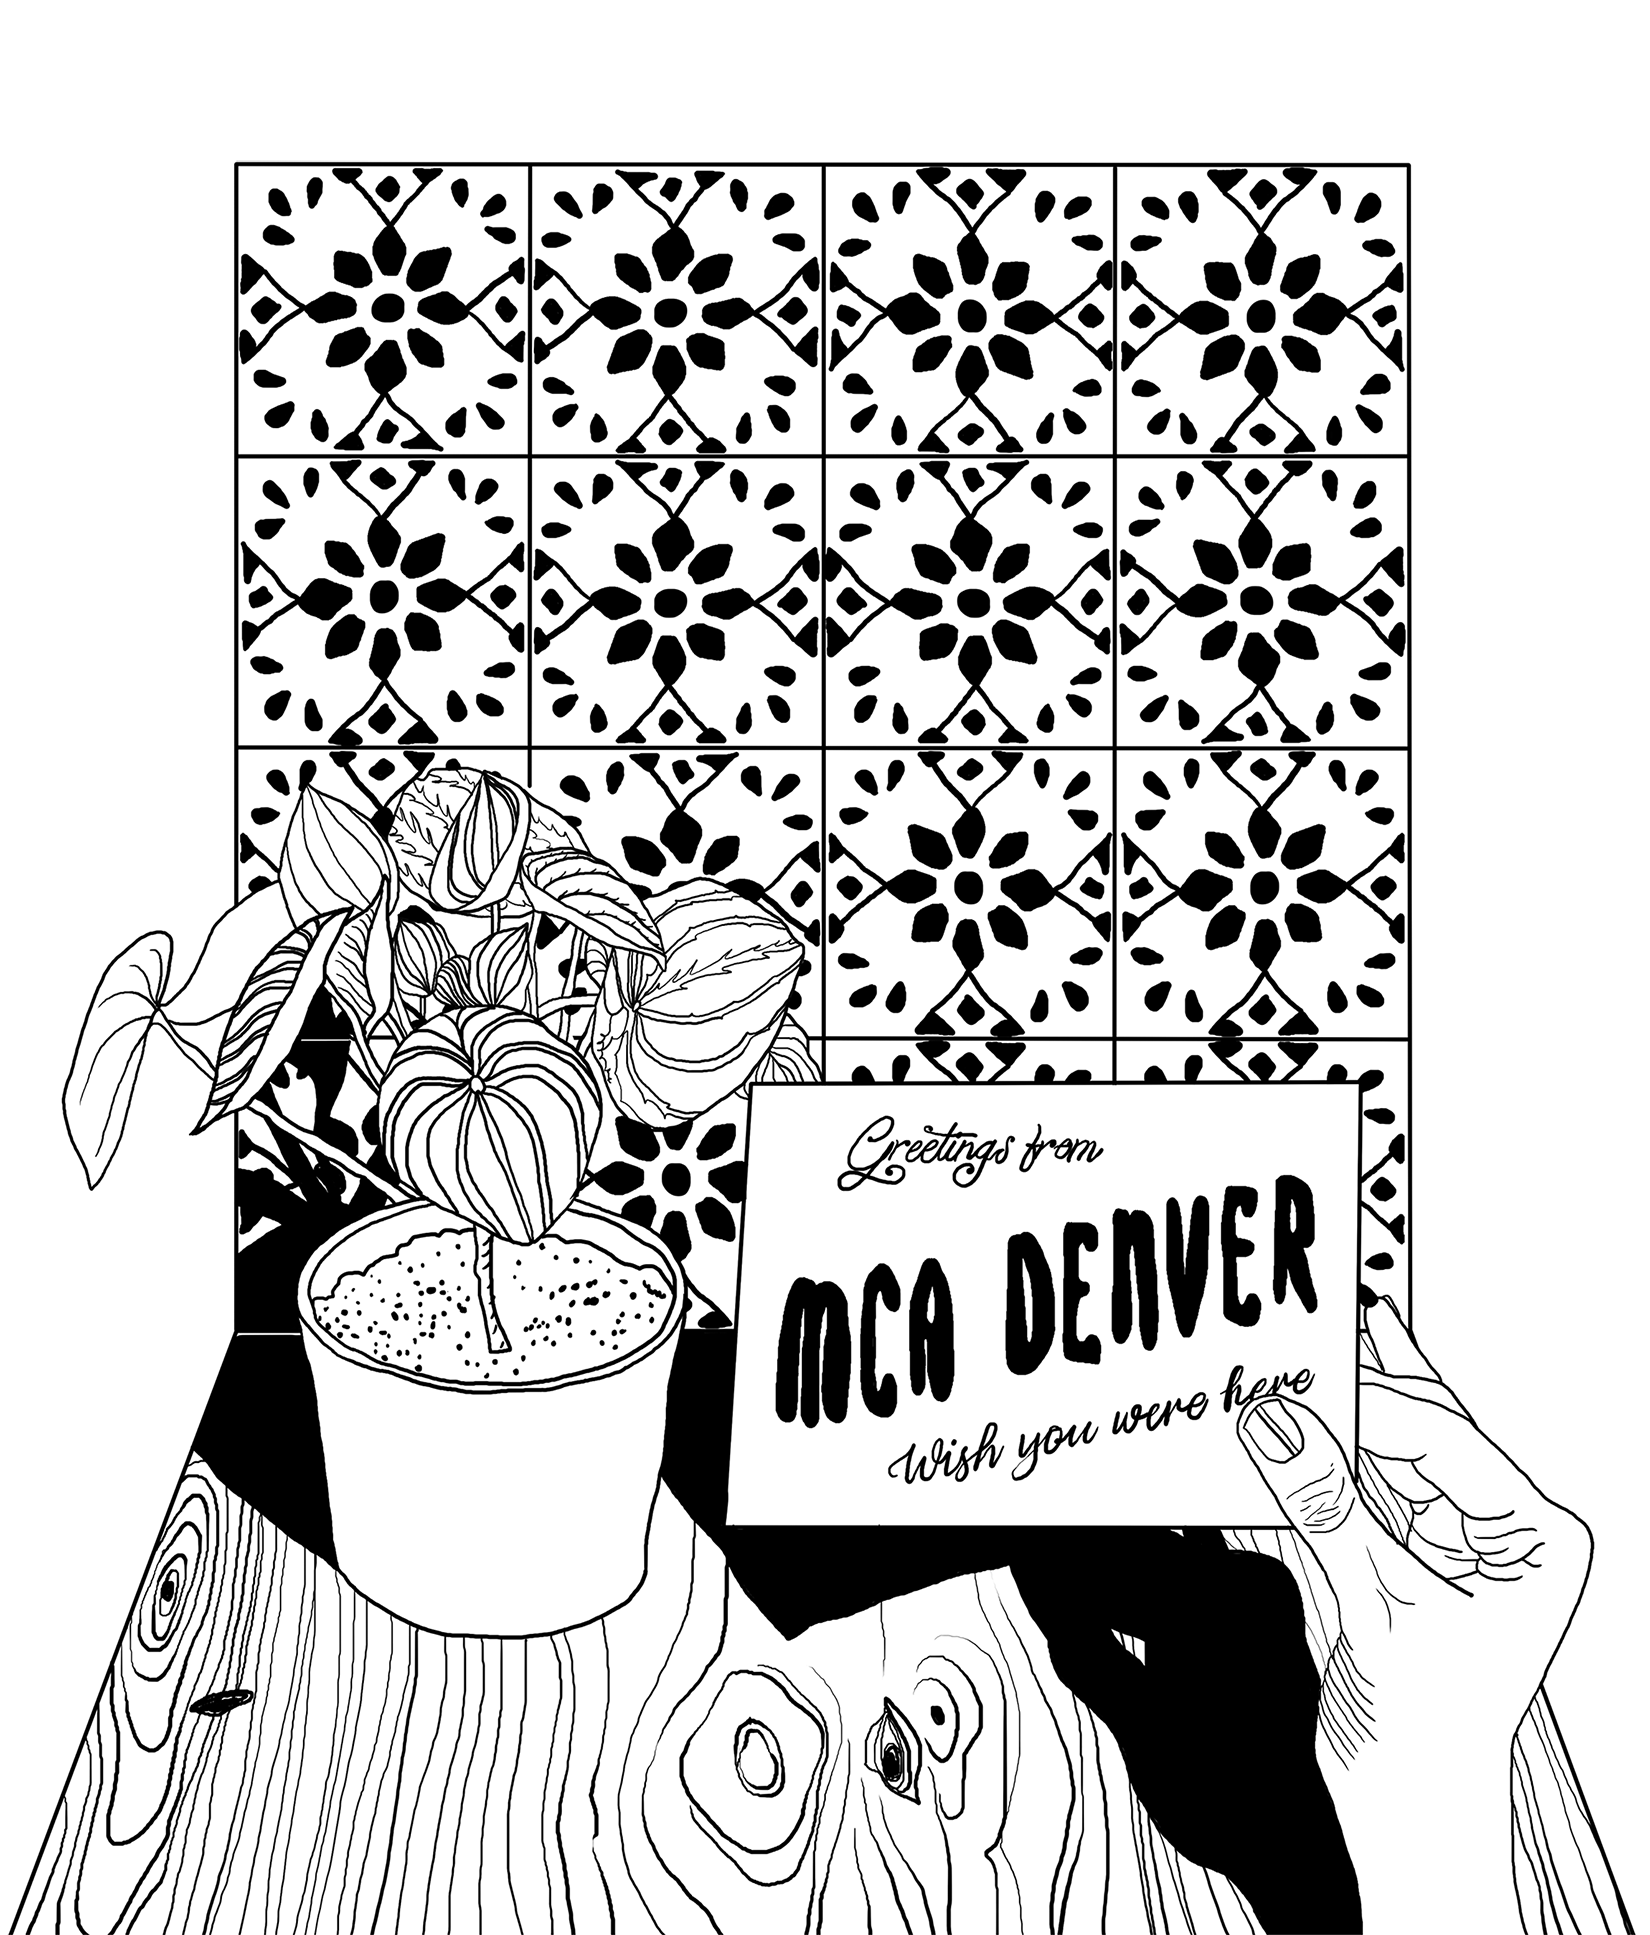 A black and white design featuring a plant sitting on a wooden table, a hand holding a card that reads, “Greetings from MCA Denver, wish you were here”, and what looks like stained glass in the background.